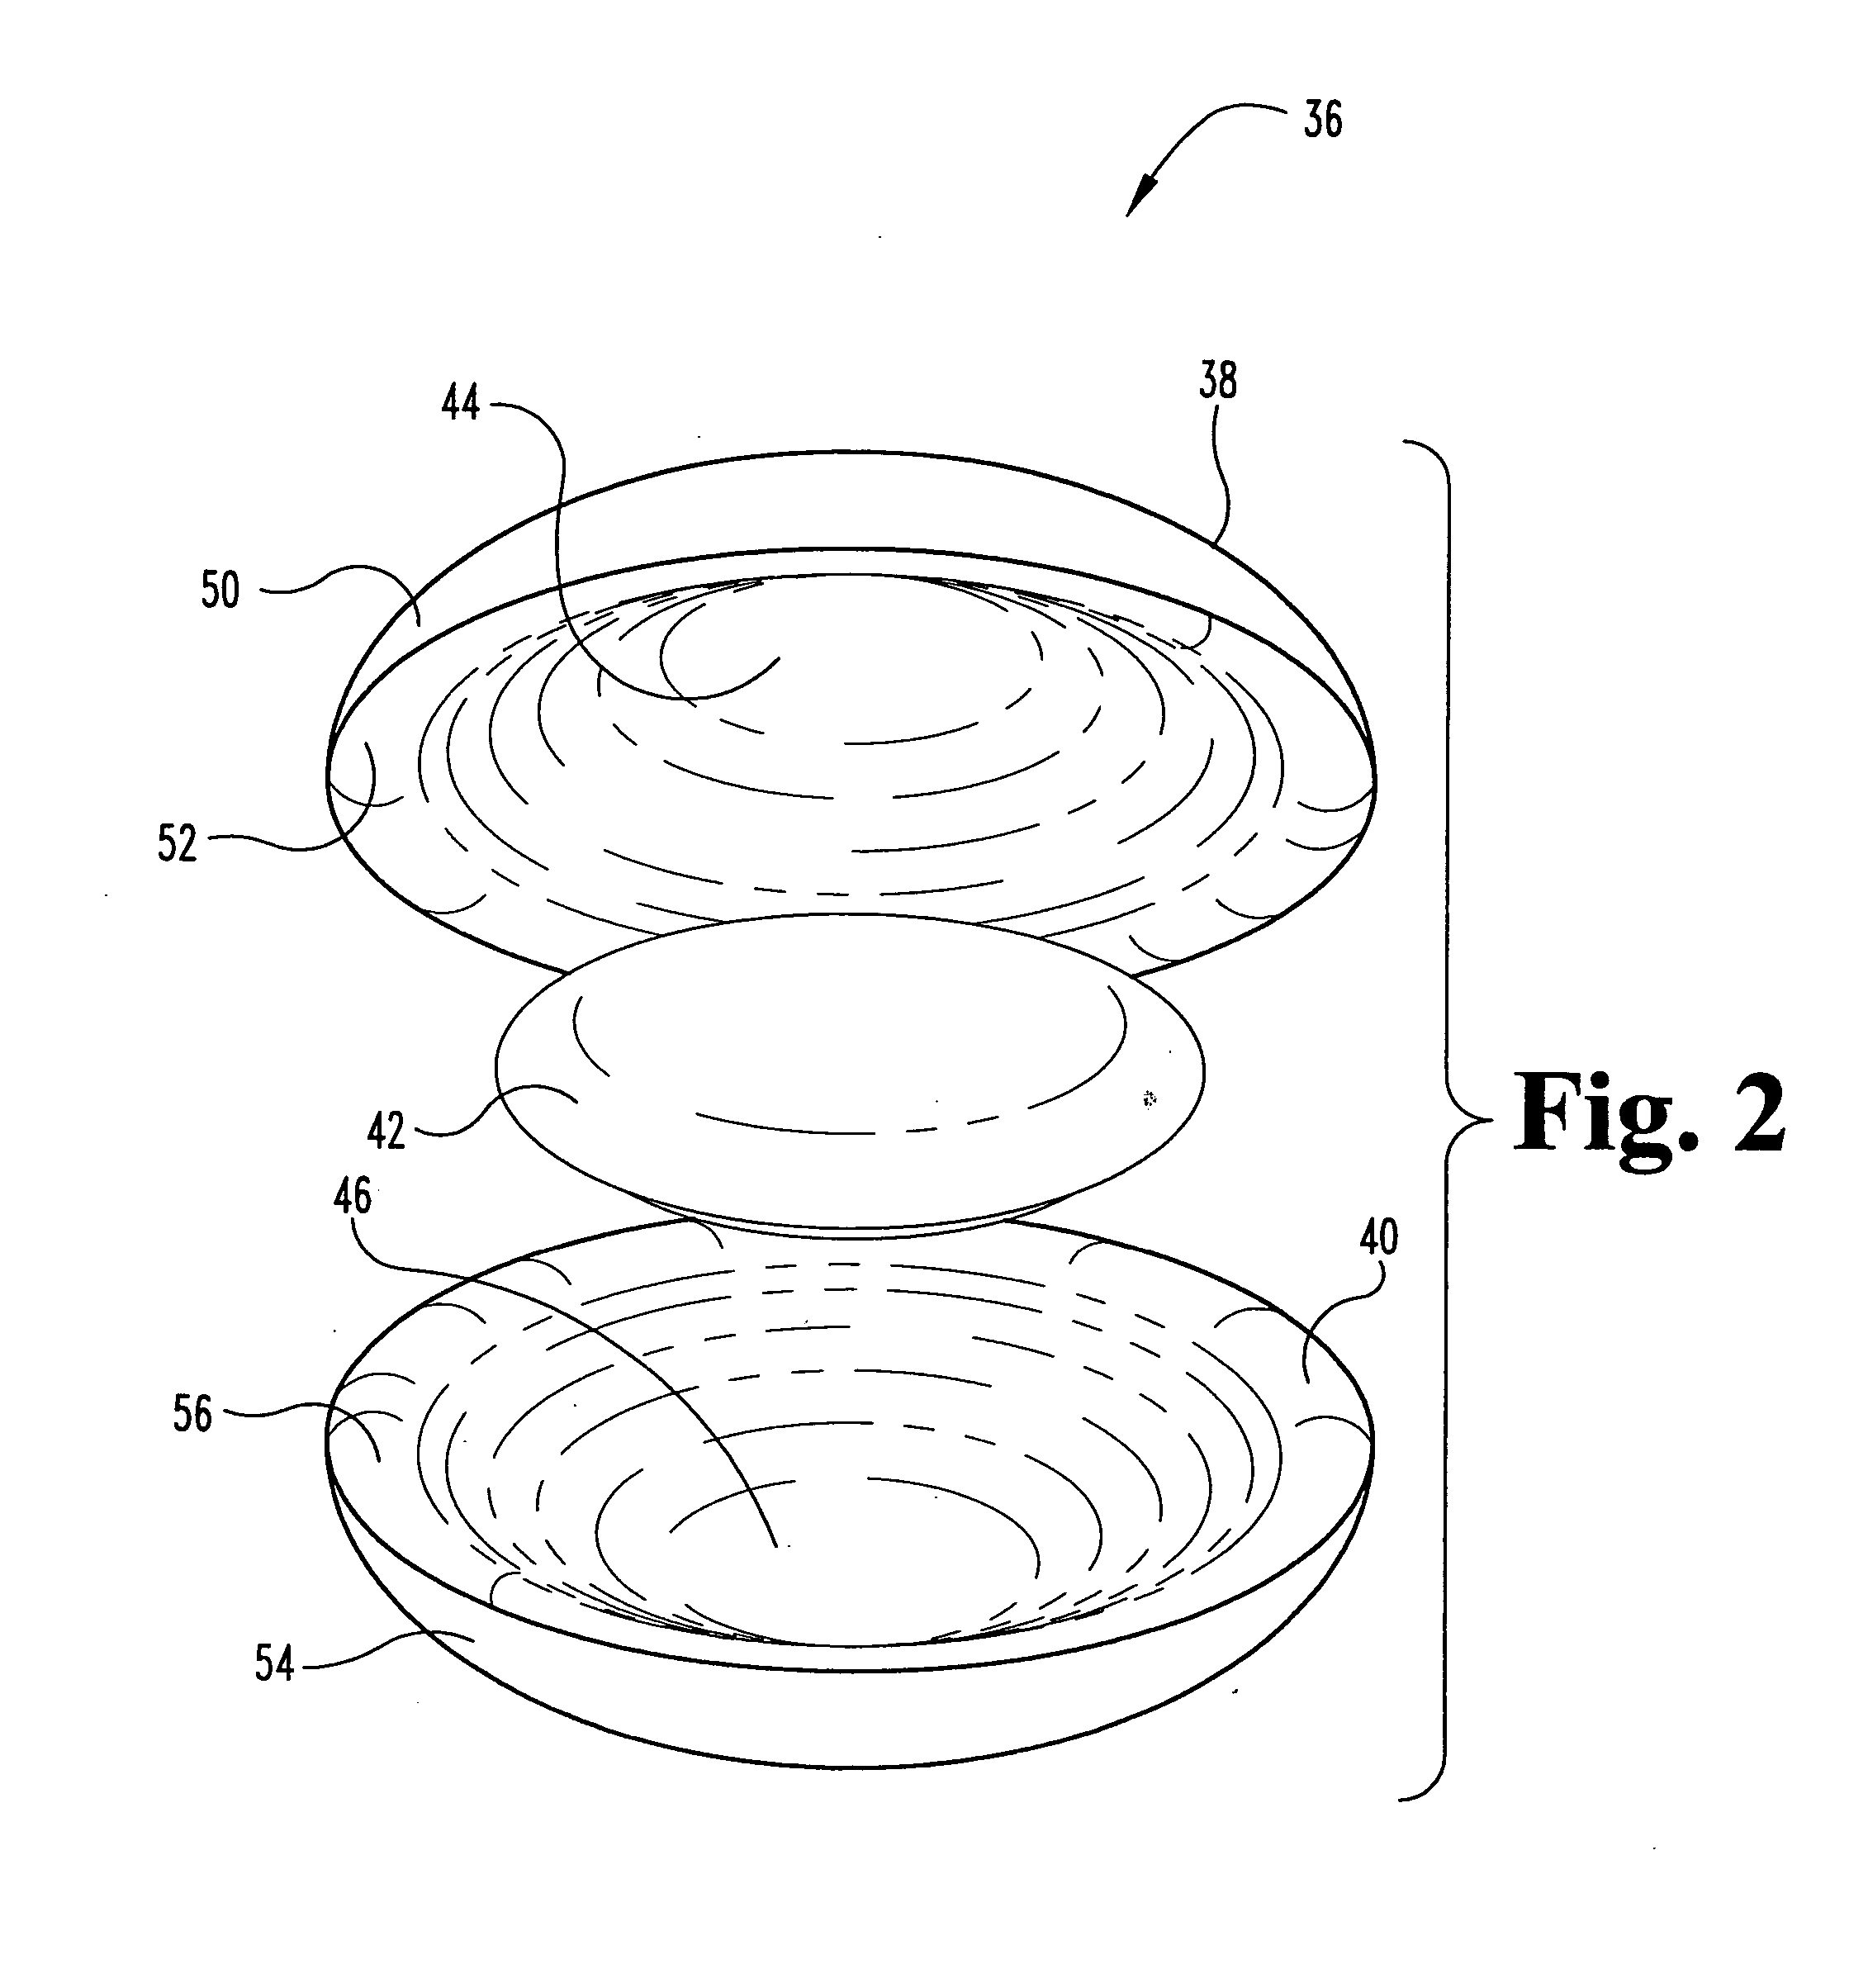 Implants based on engineered composite materials having enhanced imaging and wear resistance